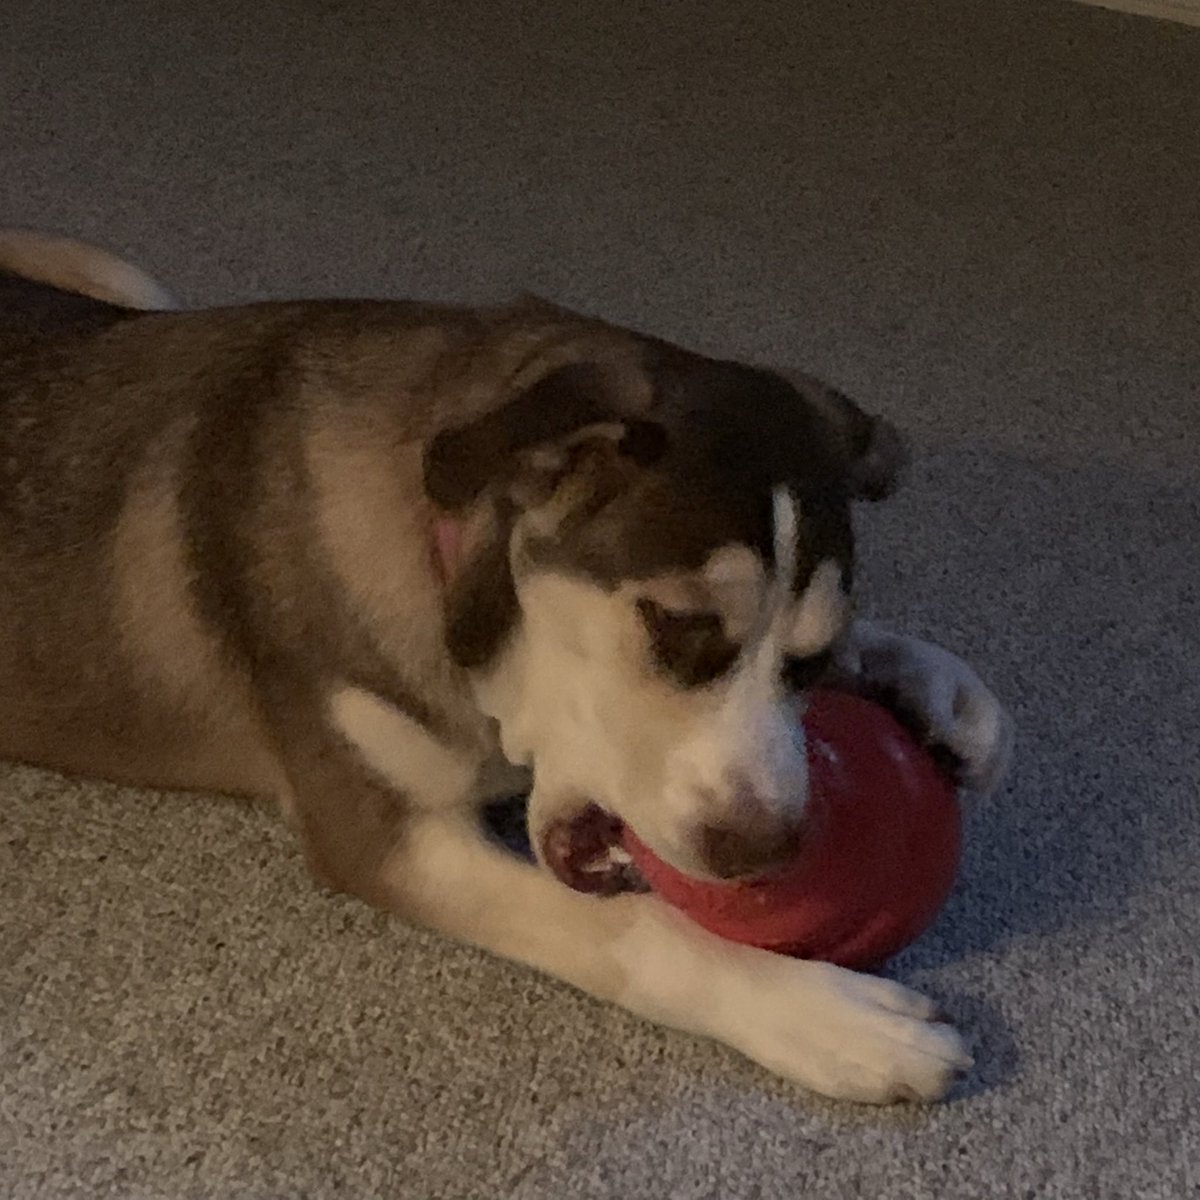 Nova: #PhotoChallengeSeptember19 
Day 3 ♻️ Recycle
I get to recycle some of Akiva’s old toys. They’re nicely broken in...
#LaborDay2019 #dogsoftwitter #DogTwitter